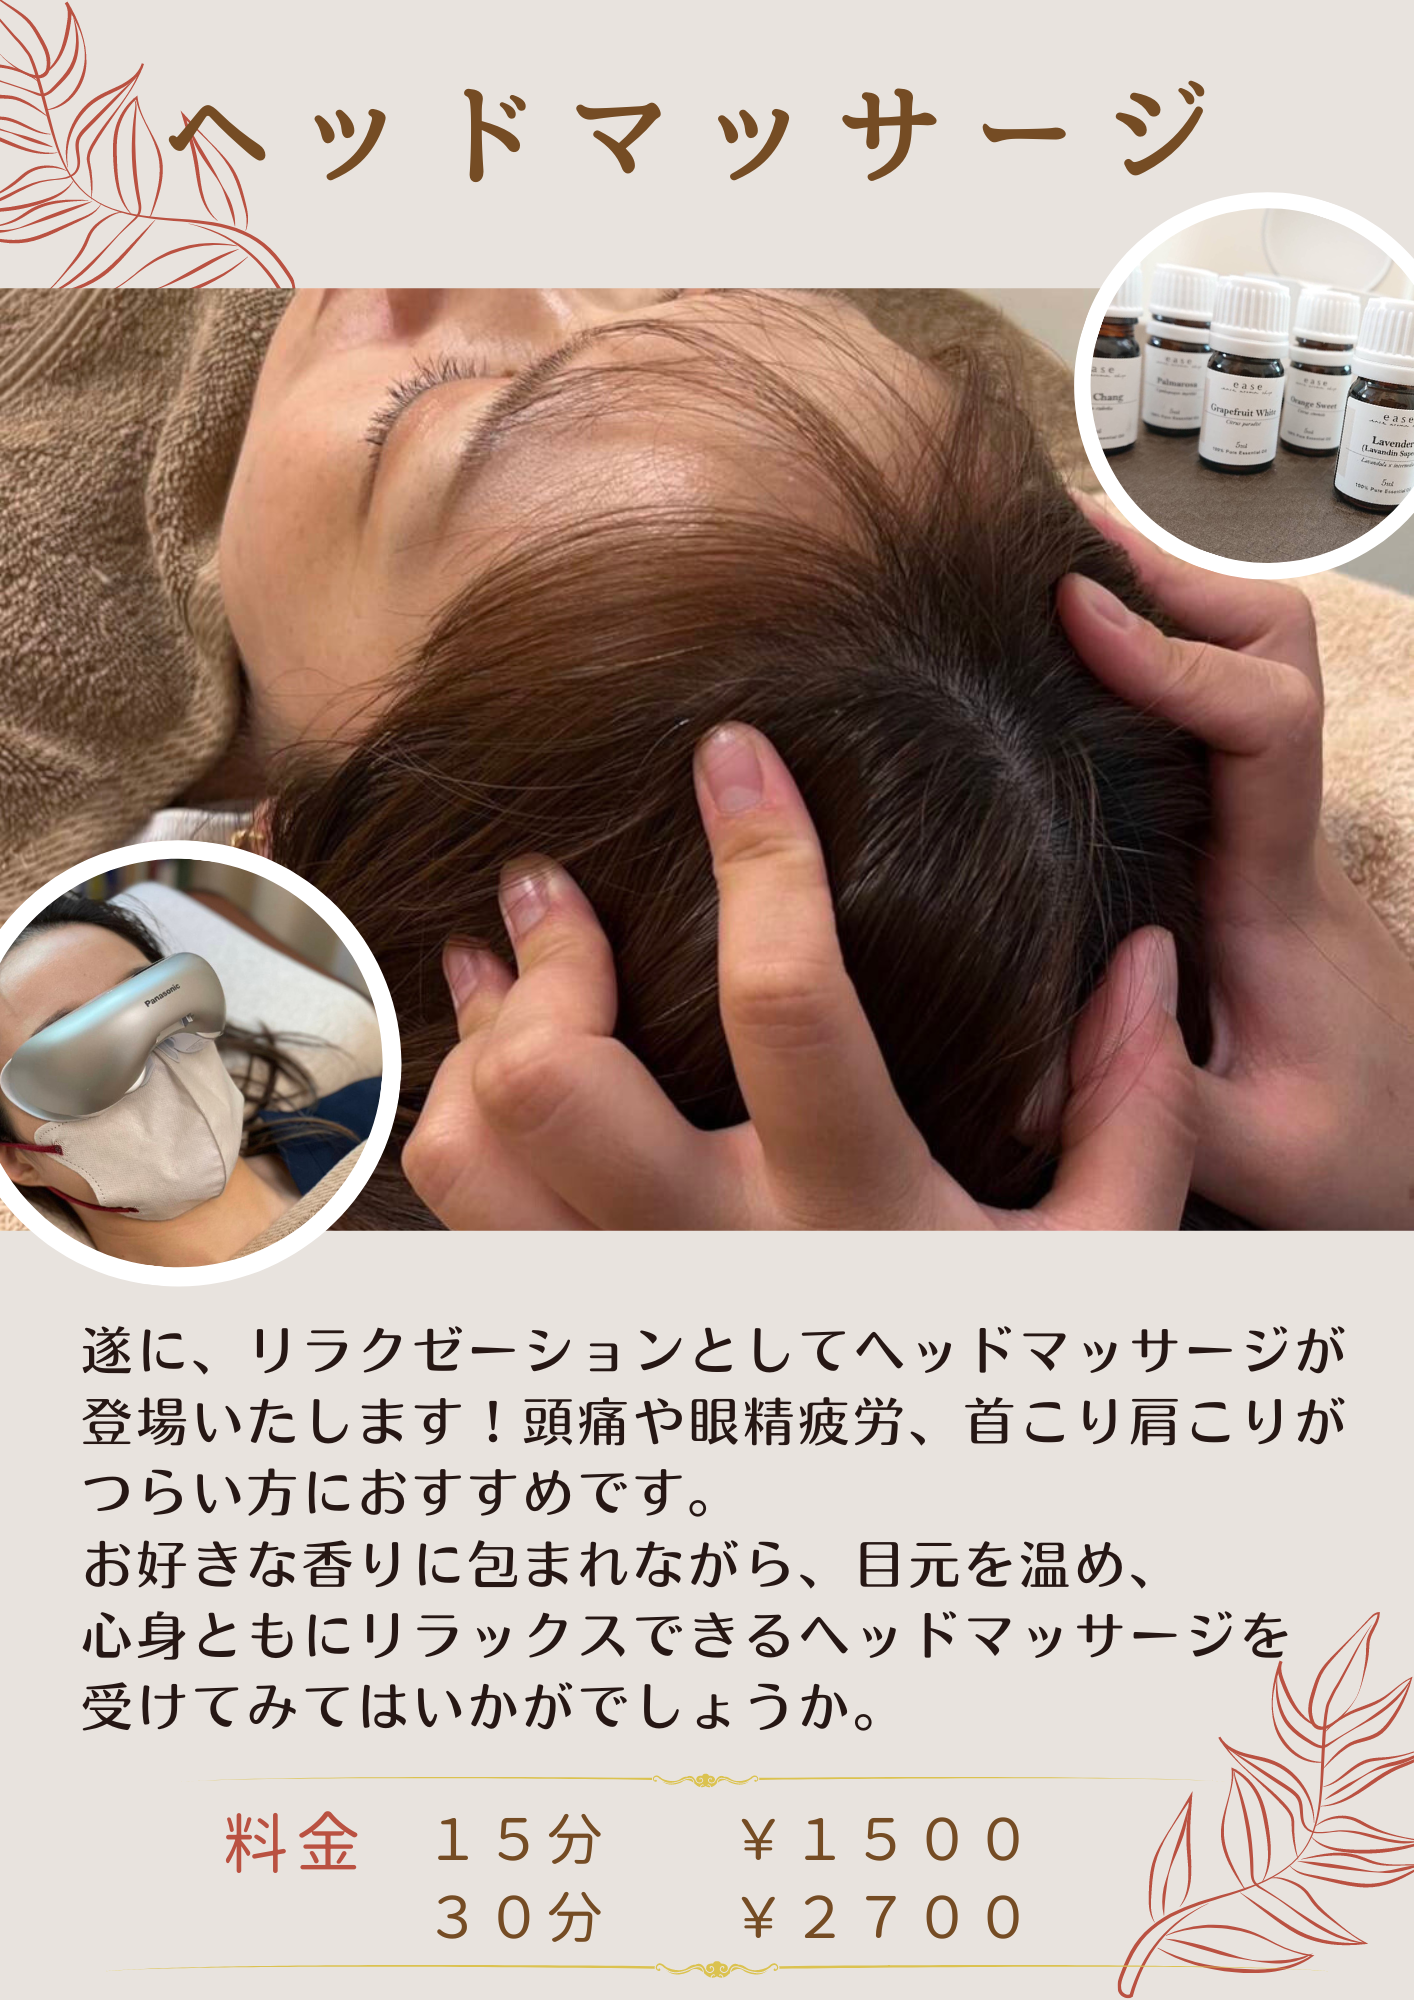 http://www.horikawaseikotu.com/img/Pink%20and%20Maroon%20Spa%20Calming%20Beauty%20%26%20Spa%20Flyer%20%285%29.png